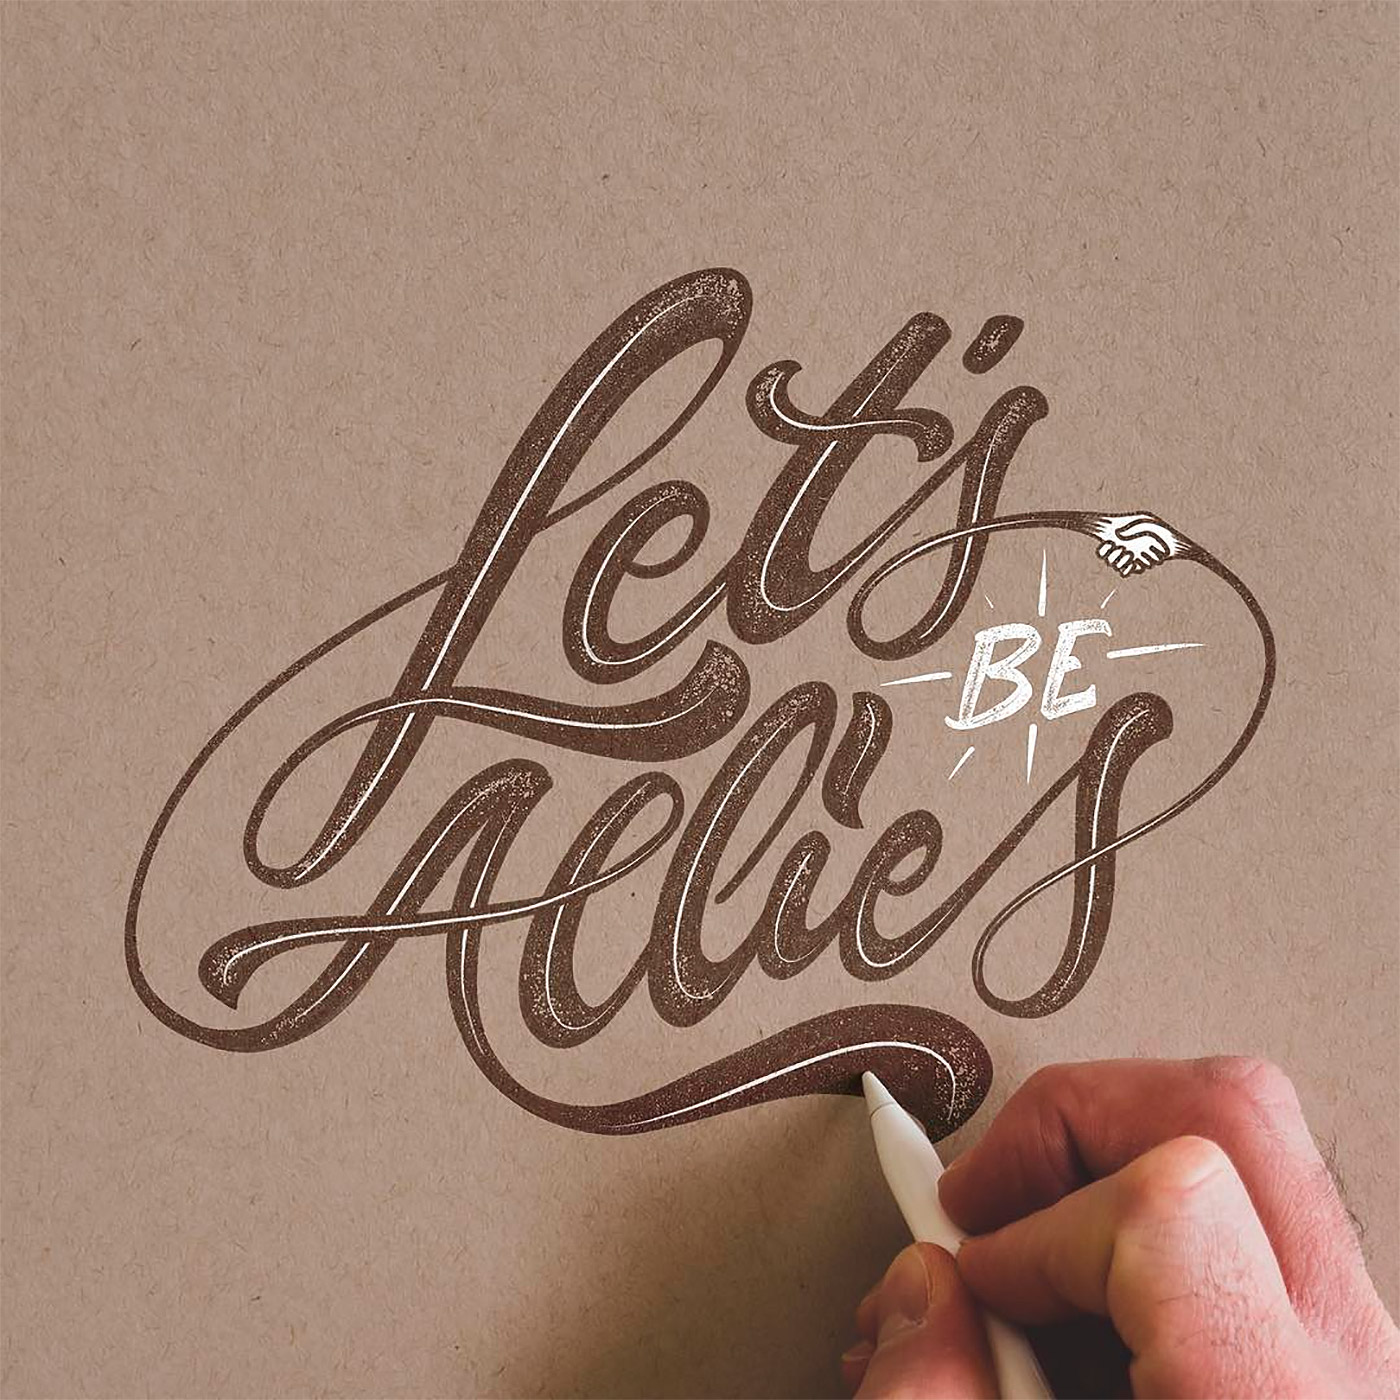 Self-Made Society: Hand-Lettering For Beginners — Made Vibrant